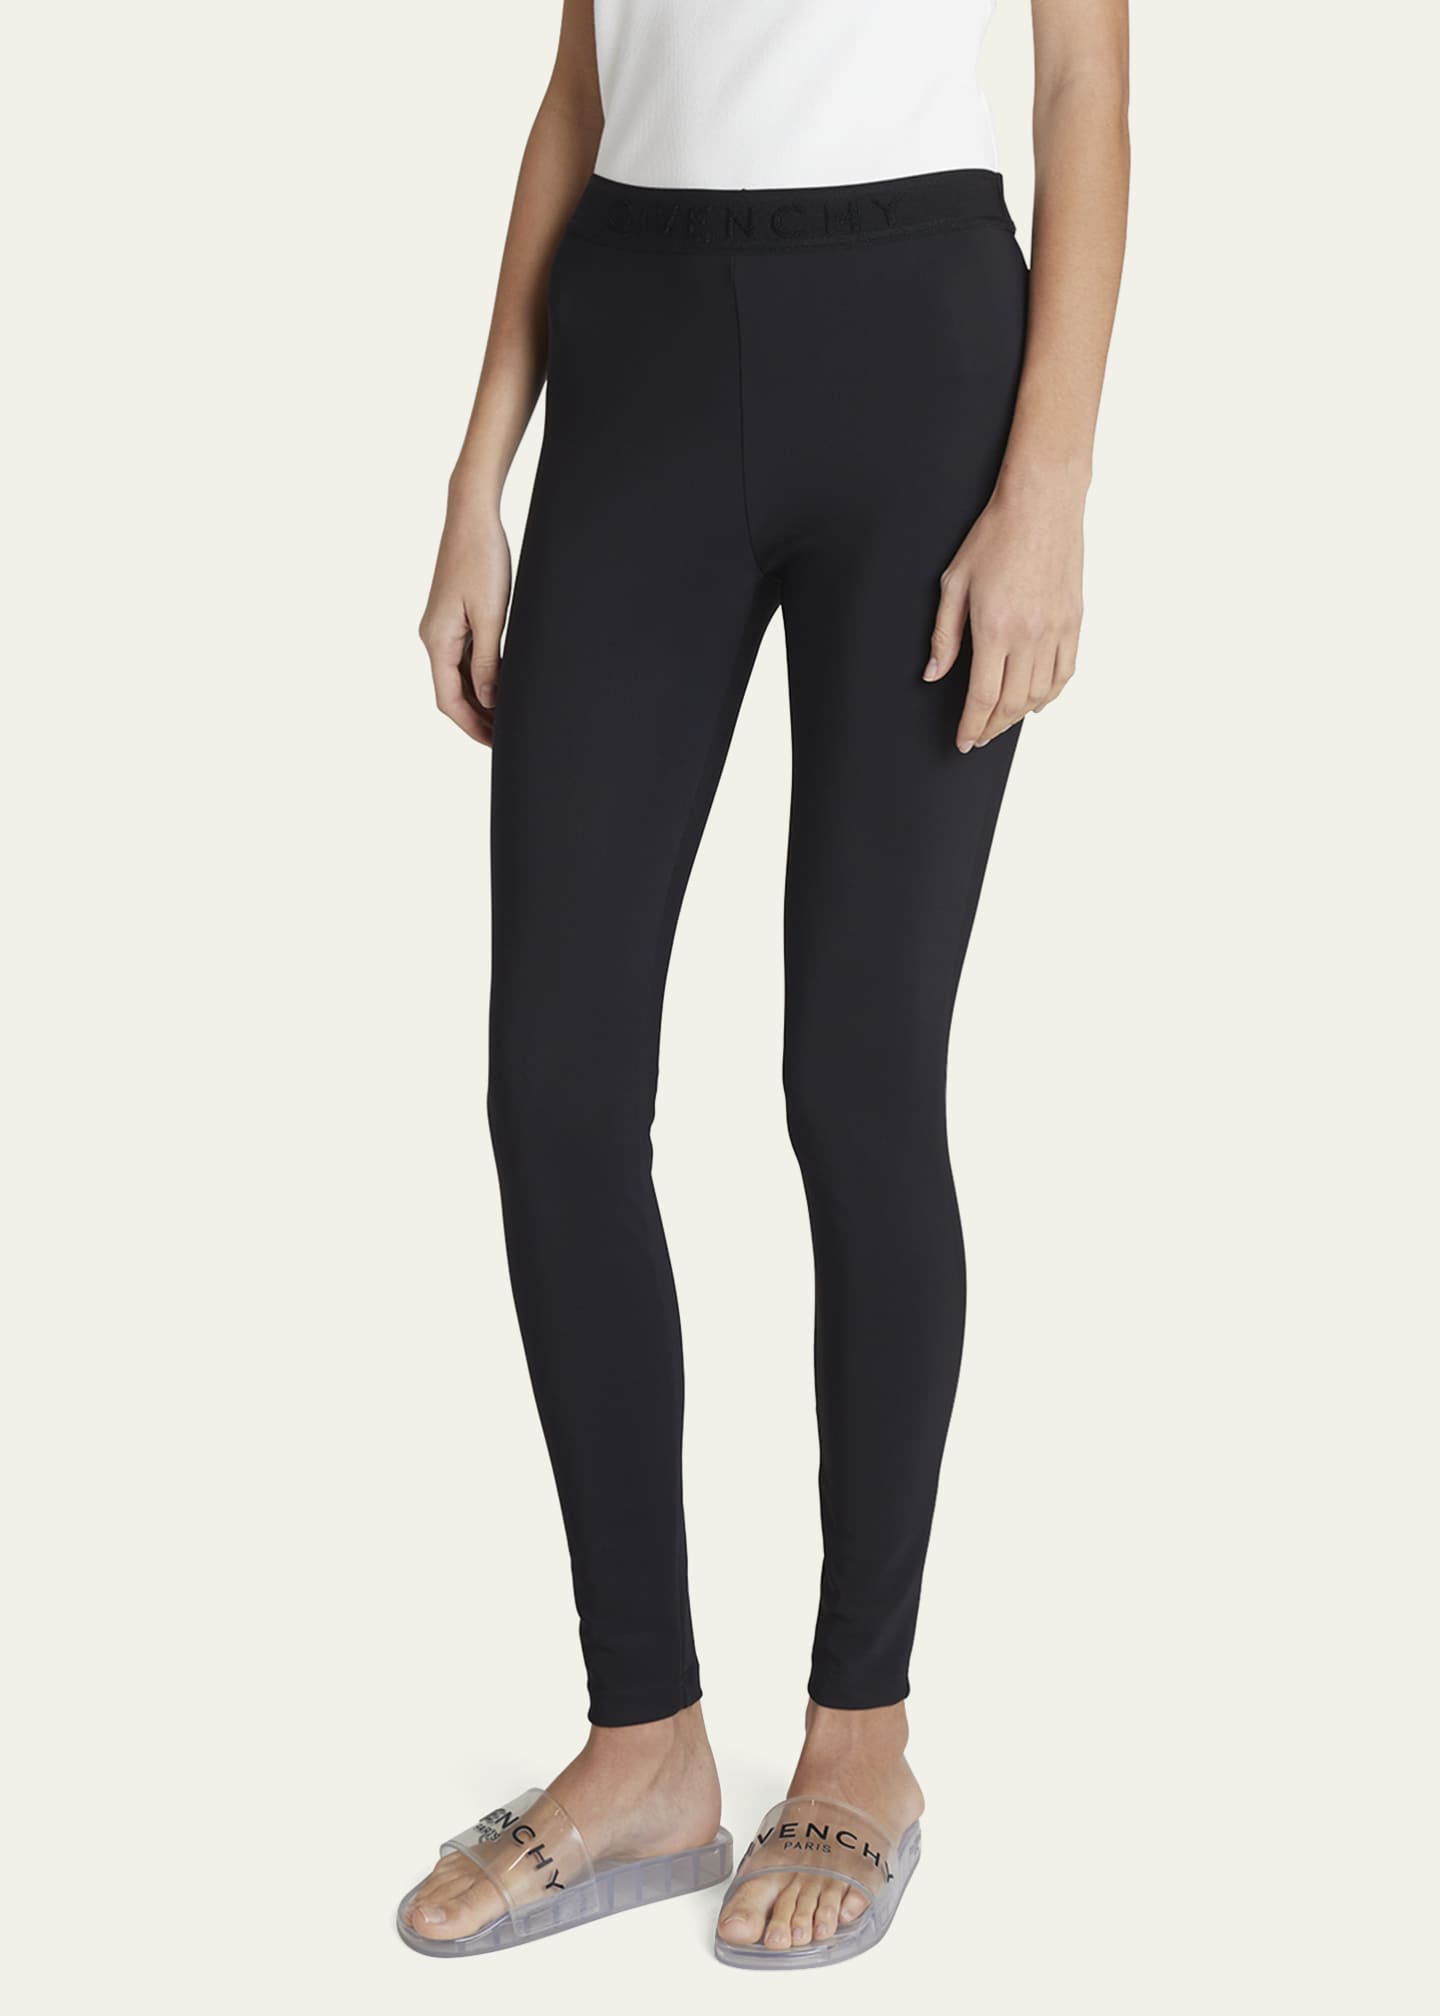 Logo leggings Givenchy - givenchy square buckle derby shoes - IetpShops TW